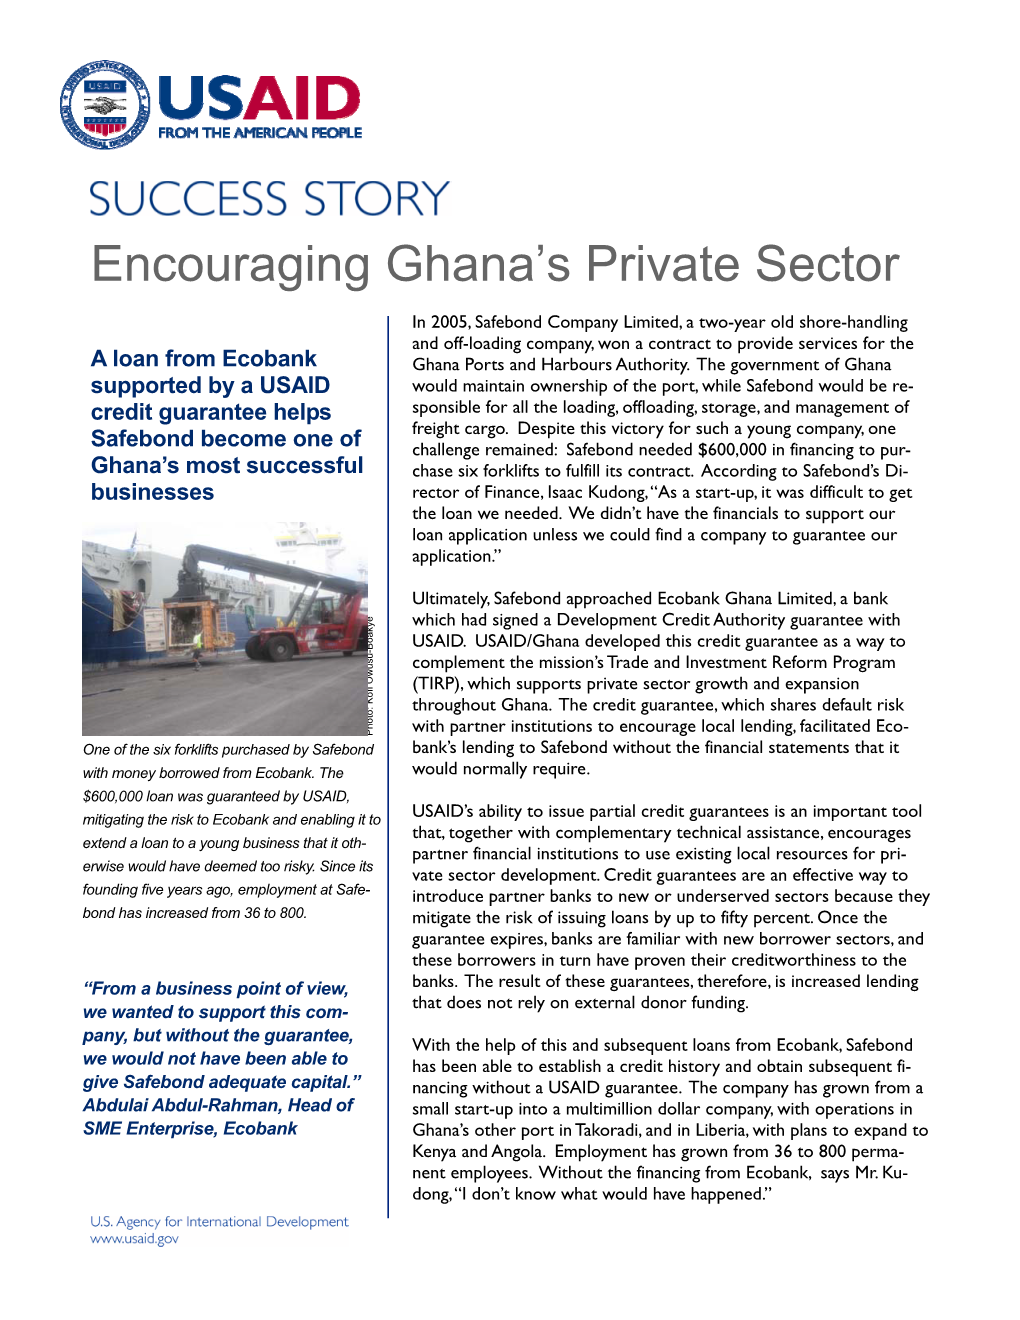 Encouraging Ghana's Private Sector